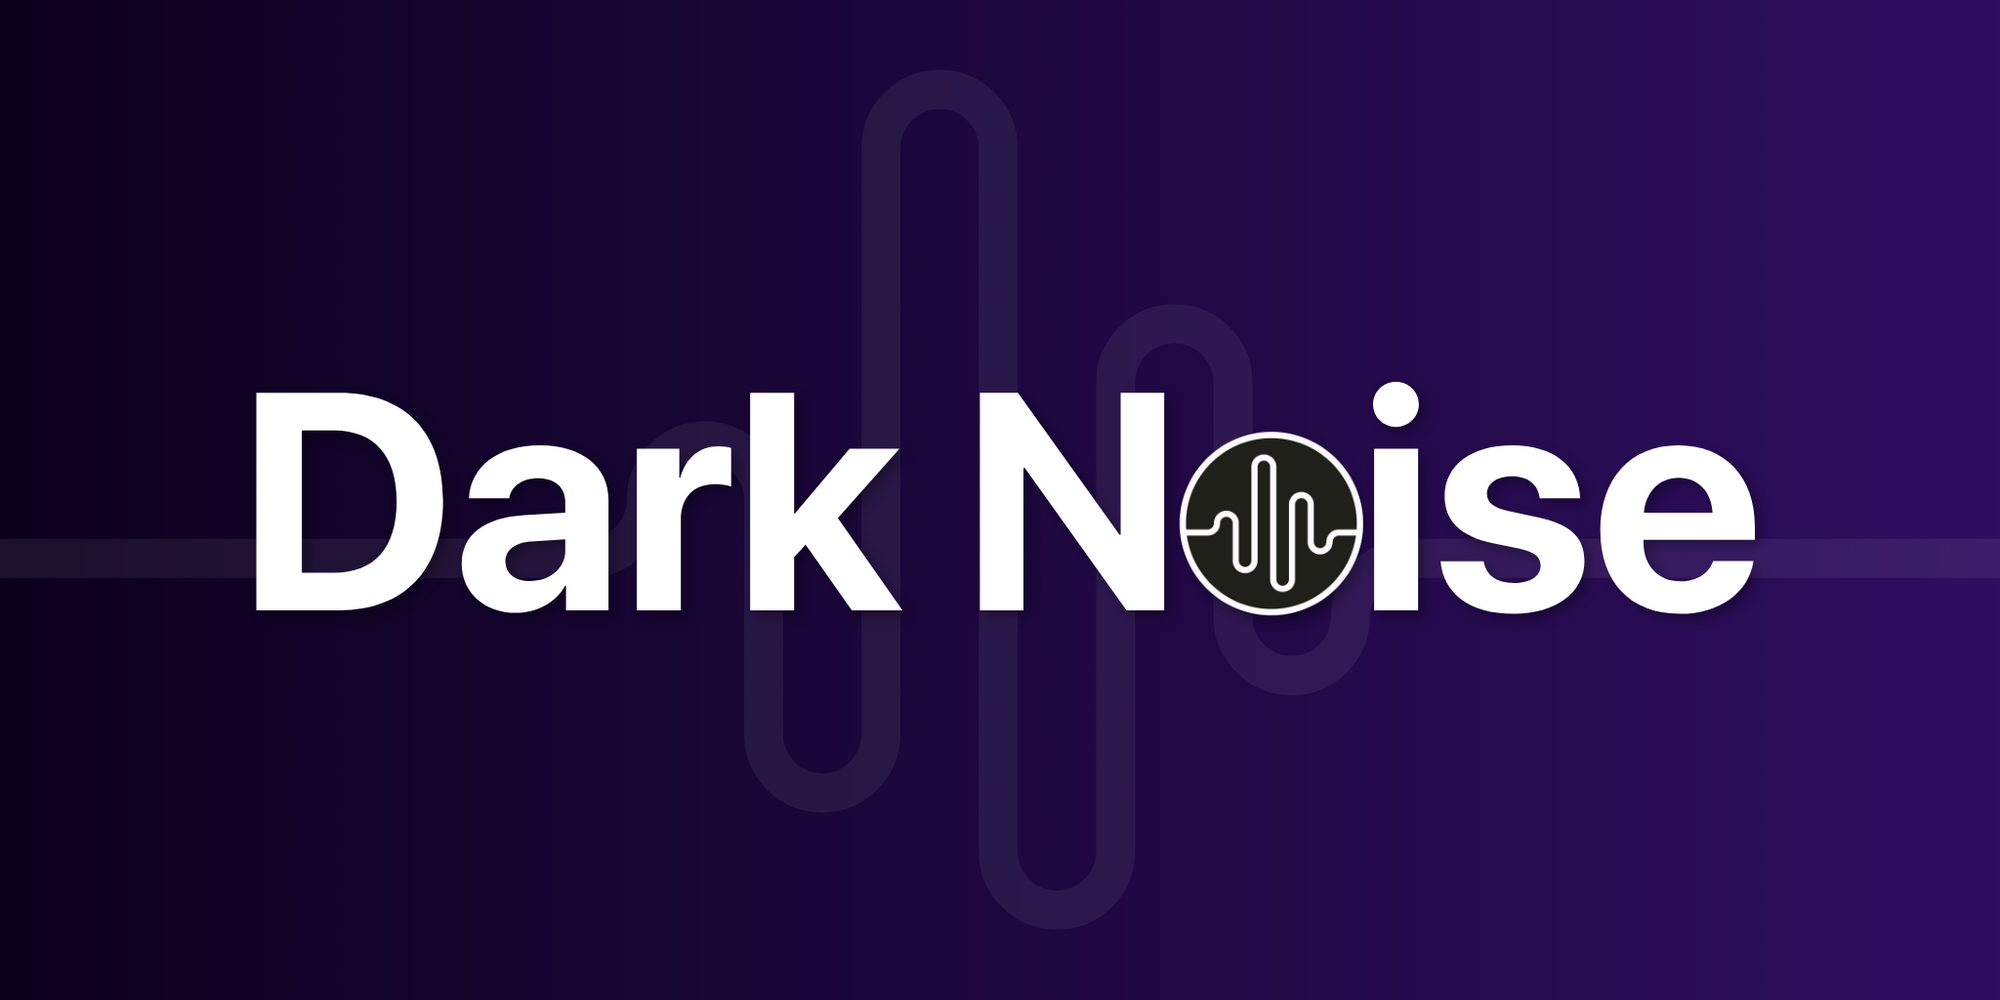 Dark Noise 2 is Out Today